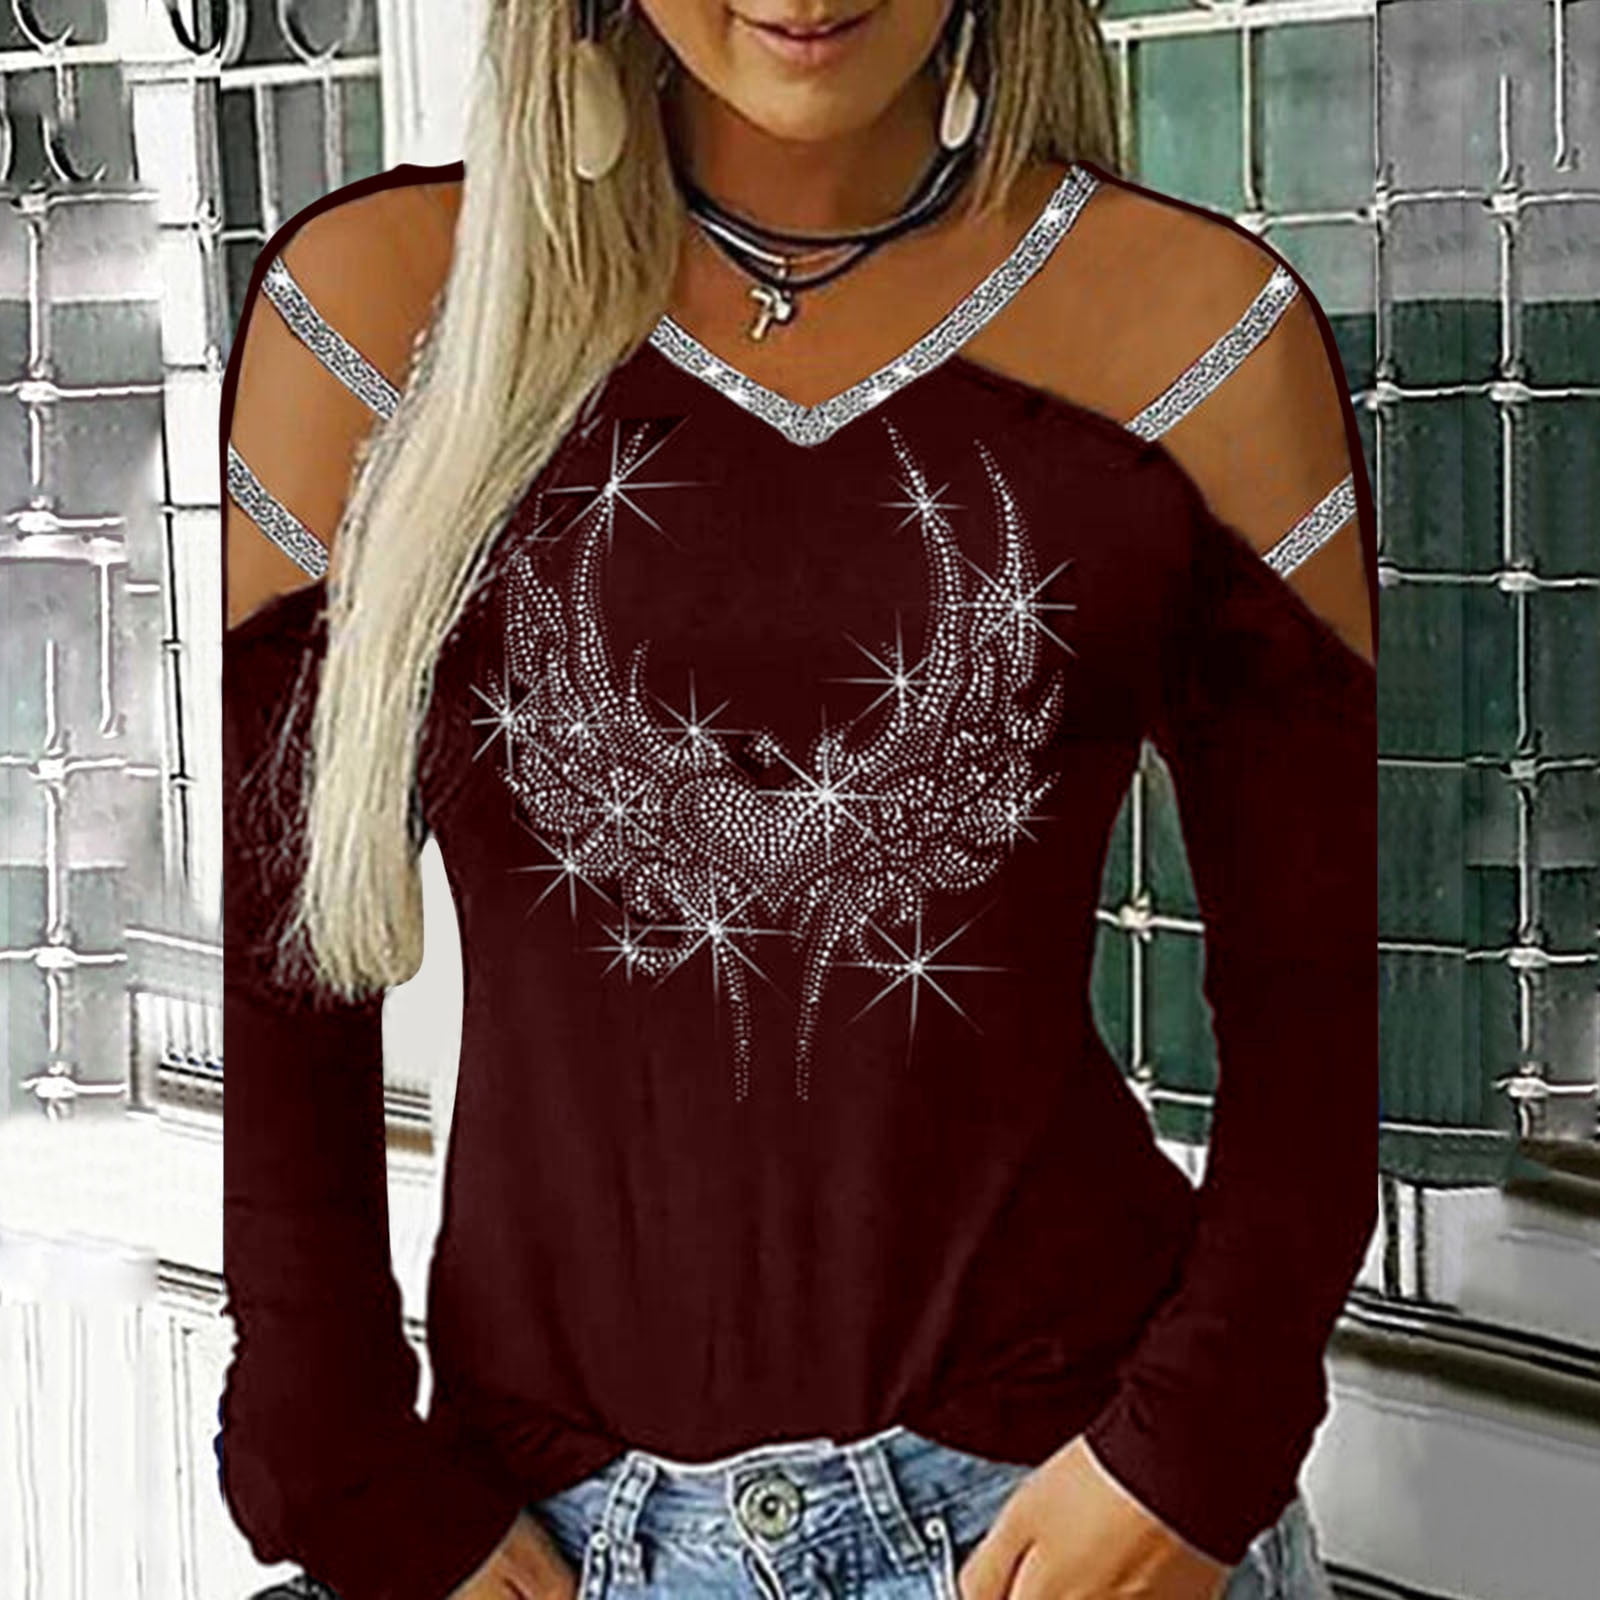 Sale Criss Cross Spider Web Studded Tunic Top